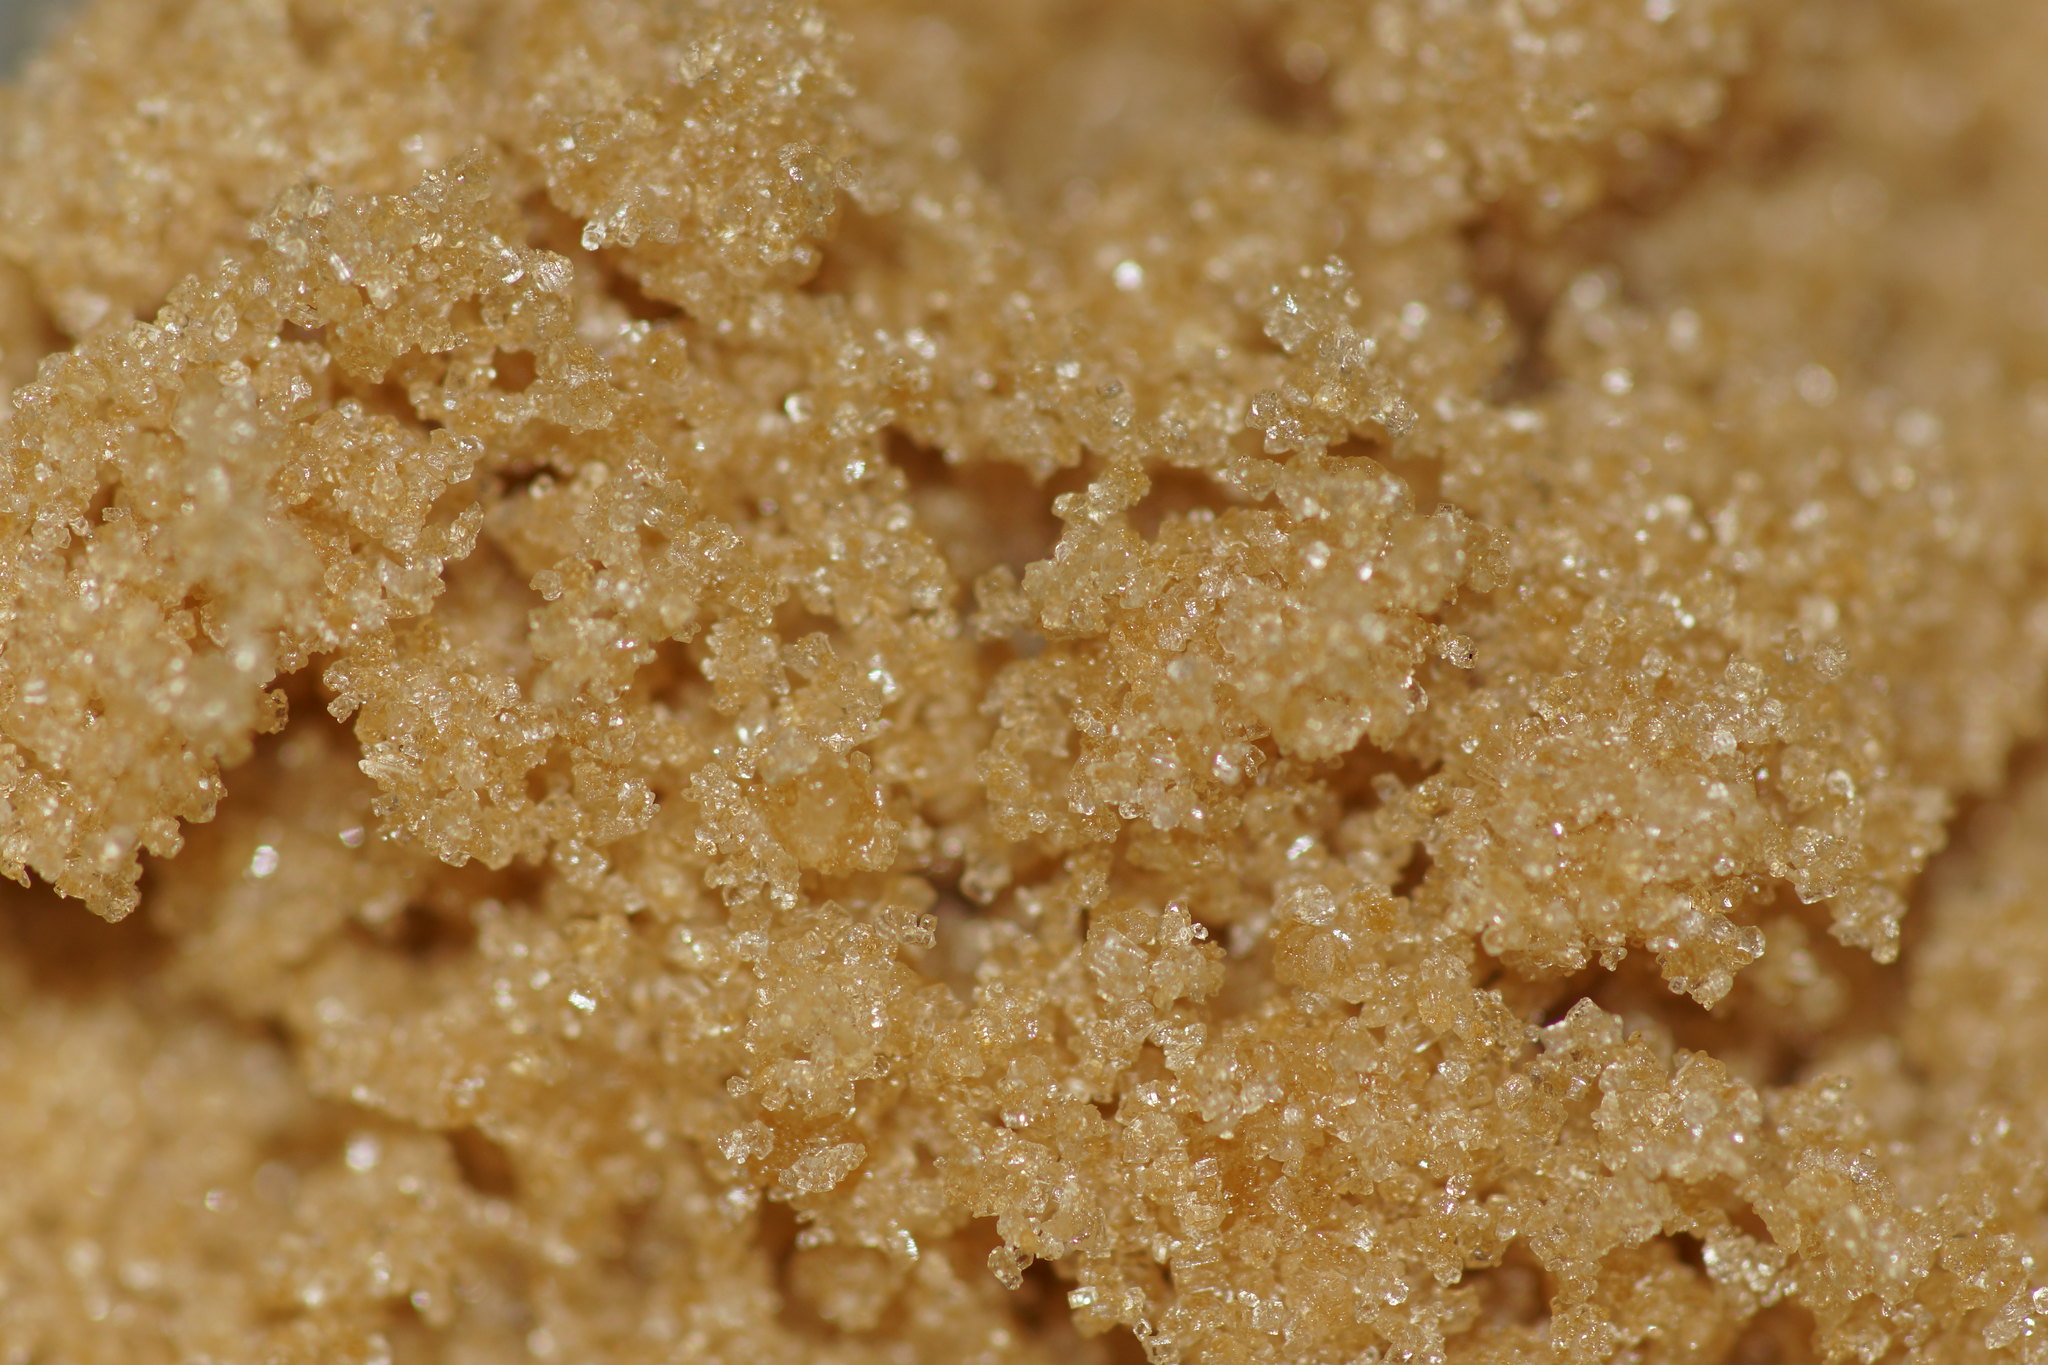 Photograph of brown sugar. The photo shows a detail of light brown sugar crystals.